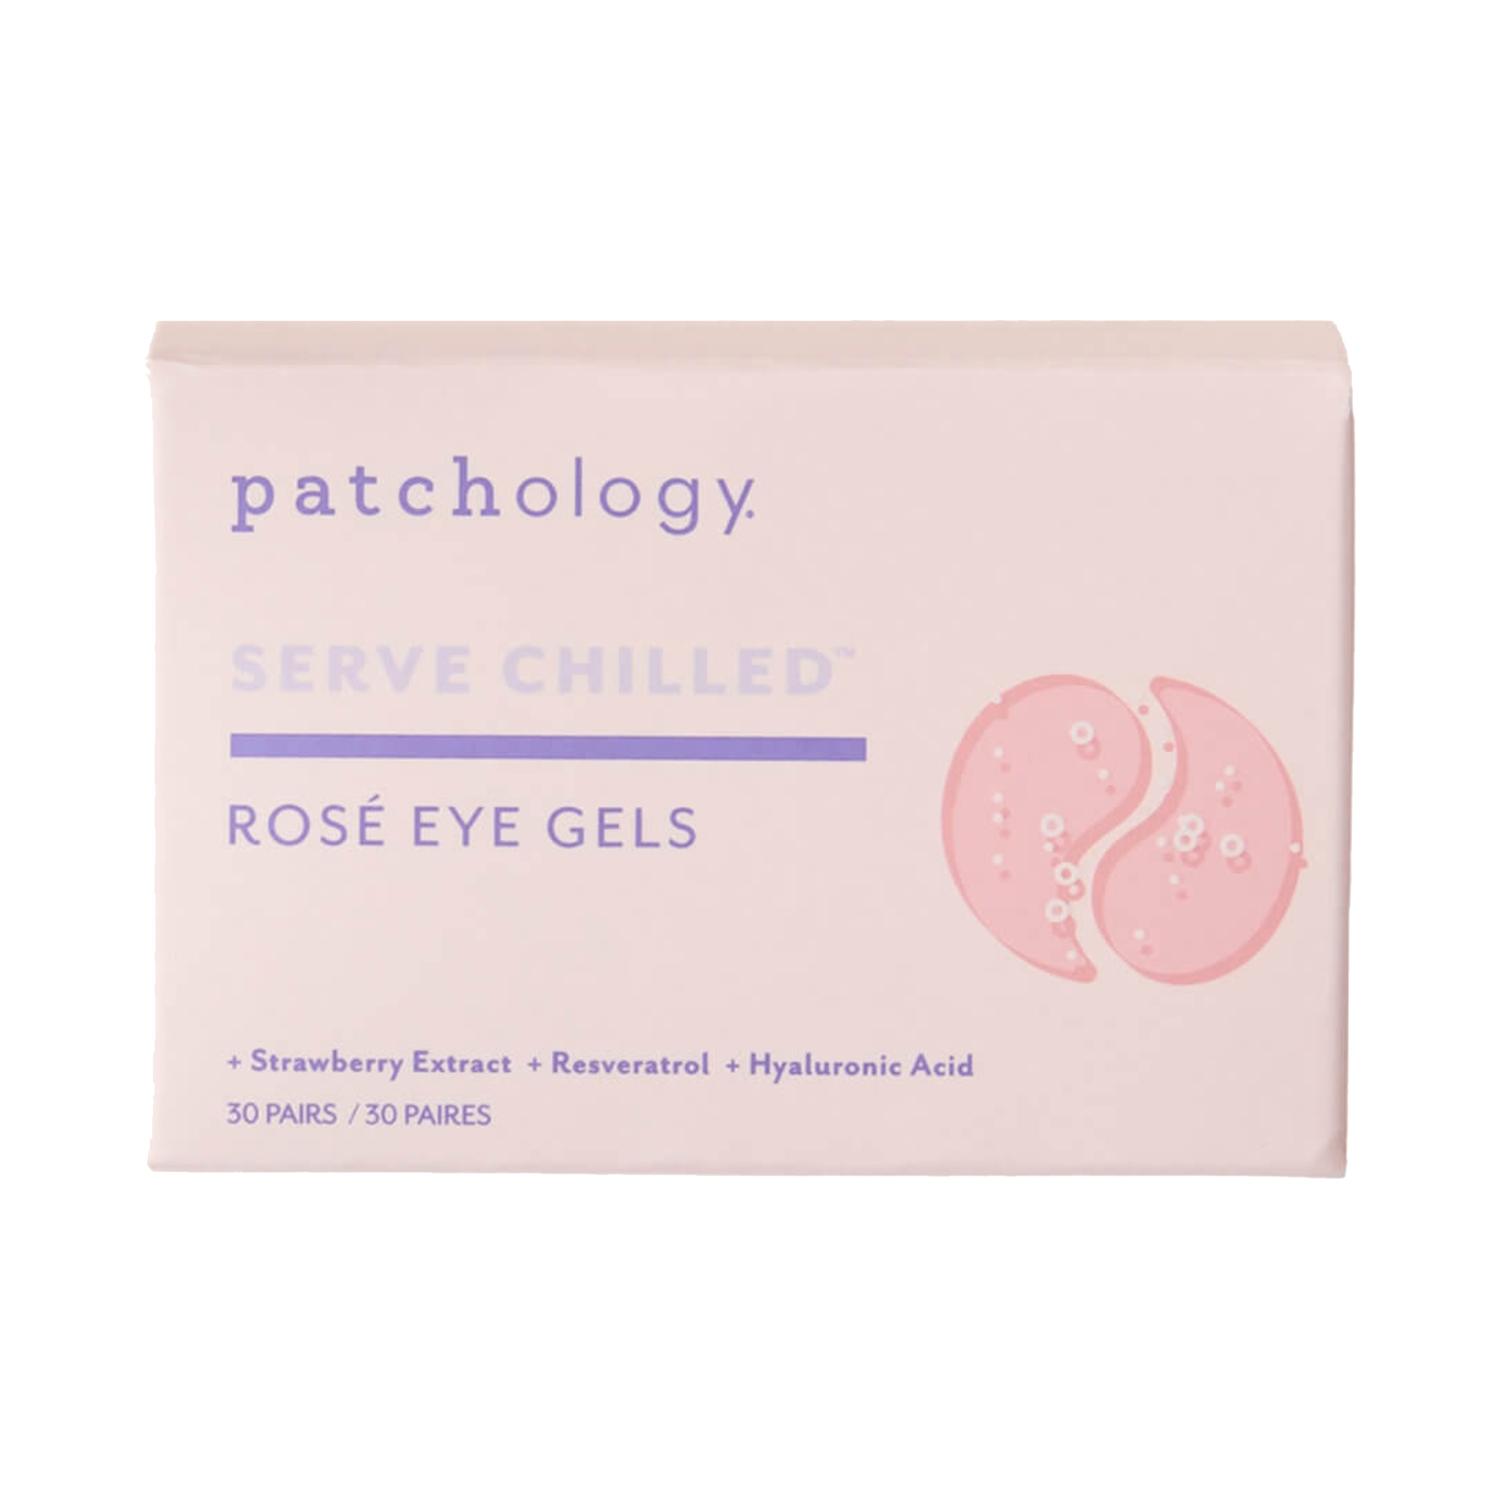 patchology serve chilled rose eye gel patches (30pcs)